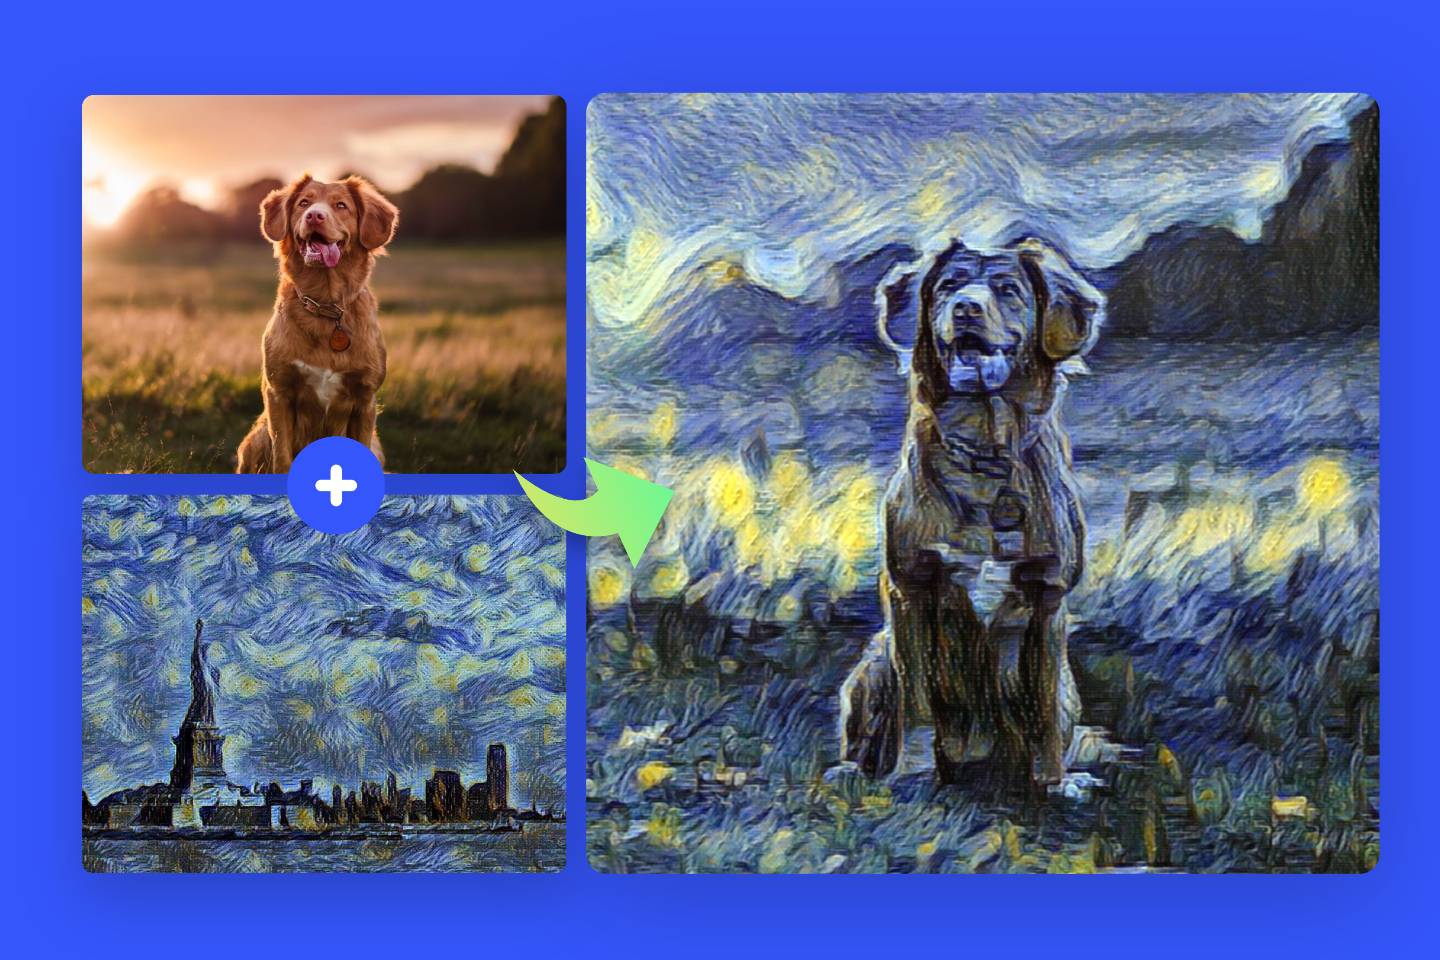 Transfer the van gogh image style to the dog photography using fotor ai style transfer tool